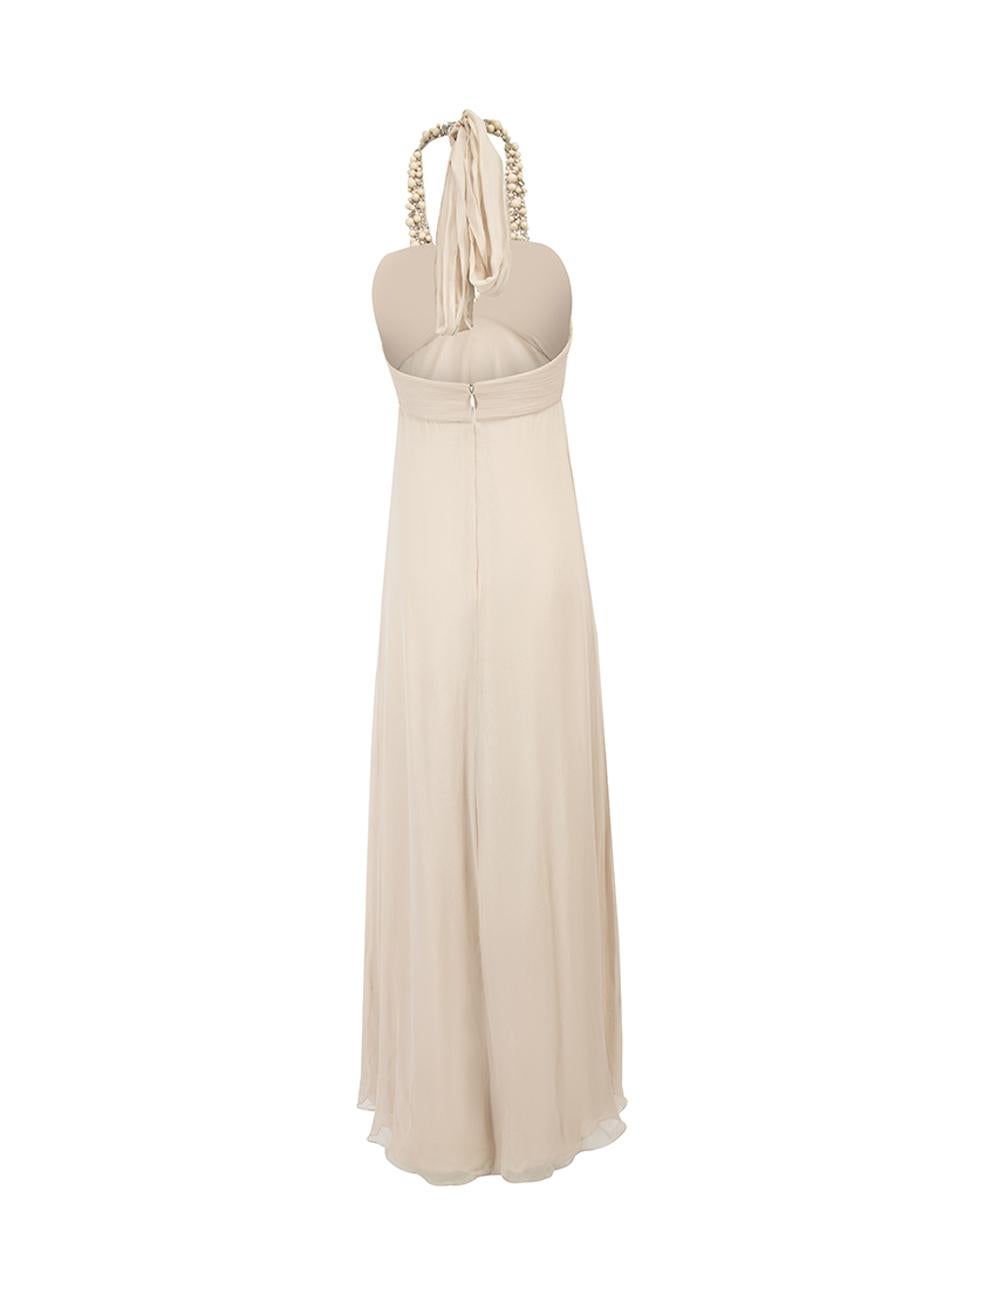 Monique Lhuillier Beige Silk Beaded Halter Neck Long Gown Size S In Excellent Condition For Sale In London, GB